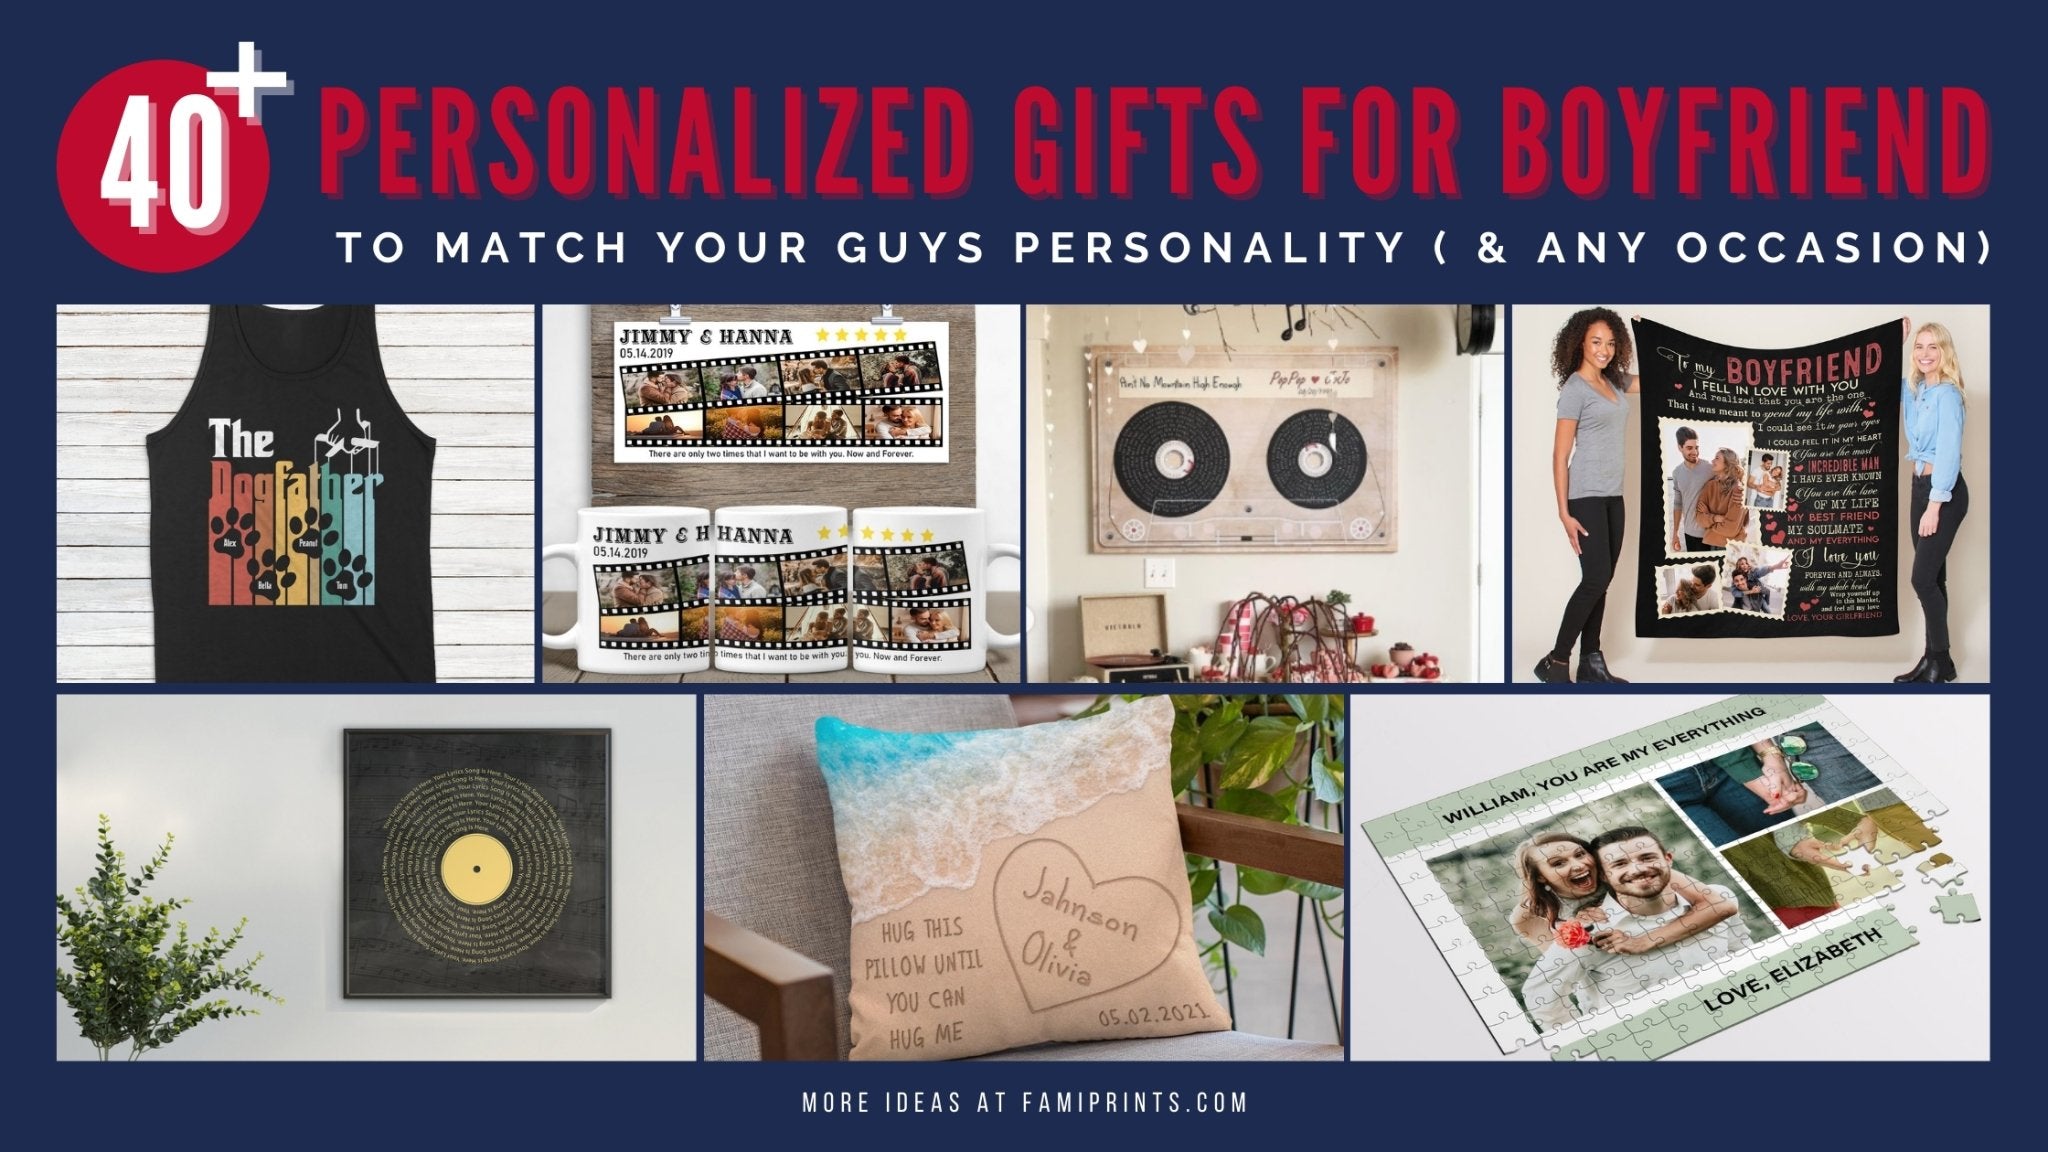 Valentines Day Gifts - Personalized Valentine Gifts for Him & Her | Zoomin